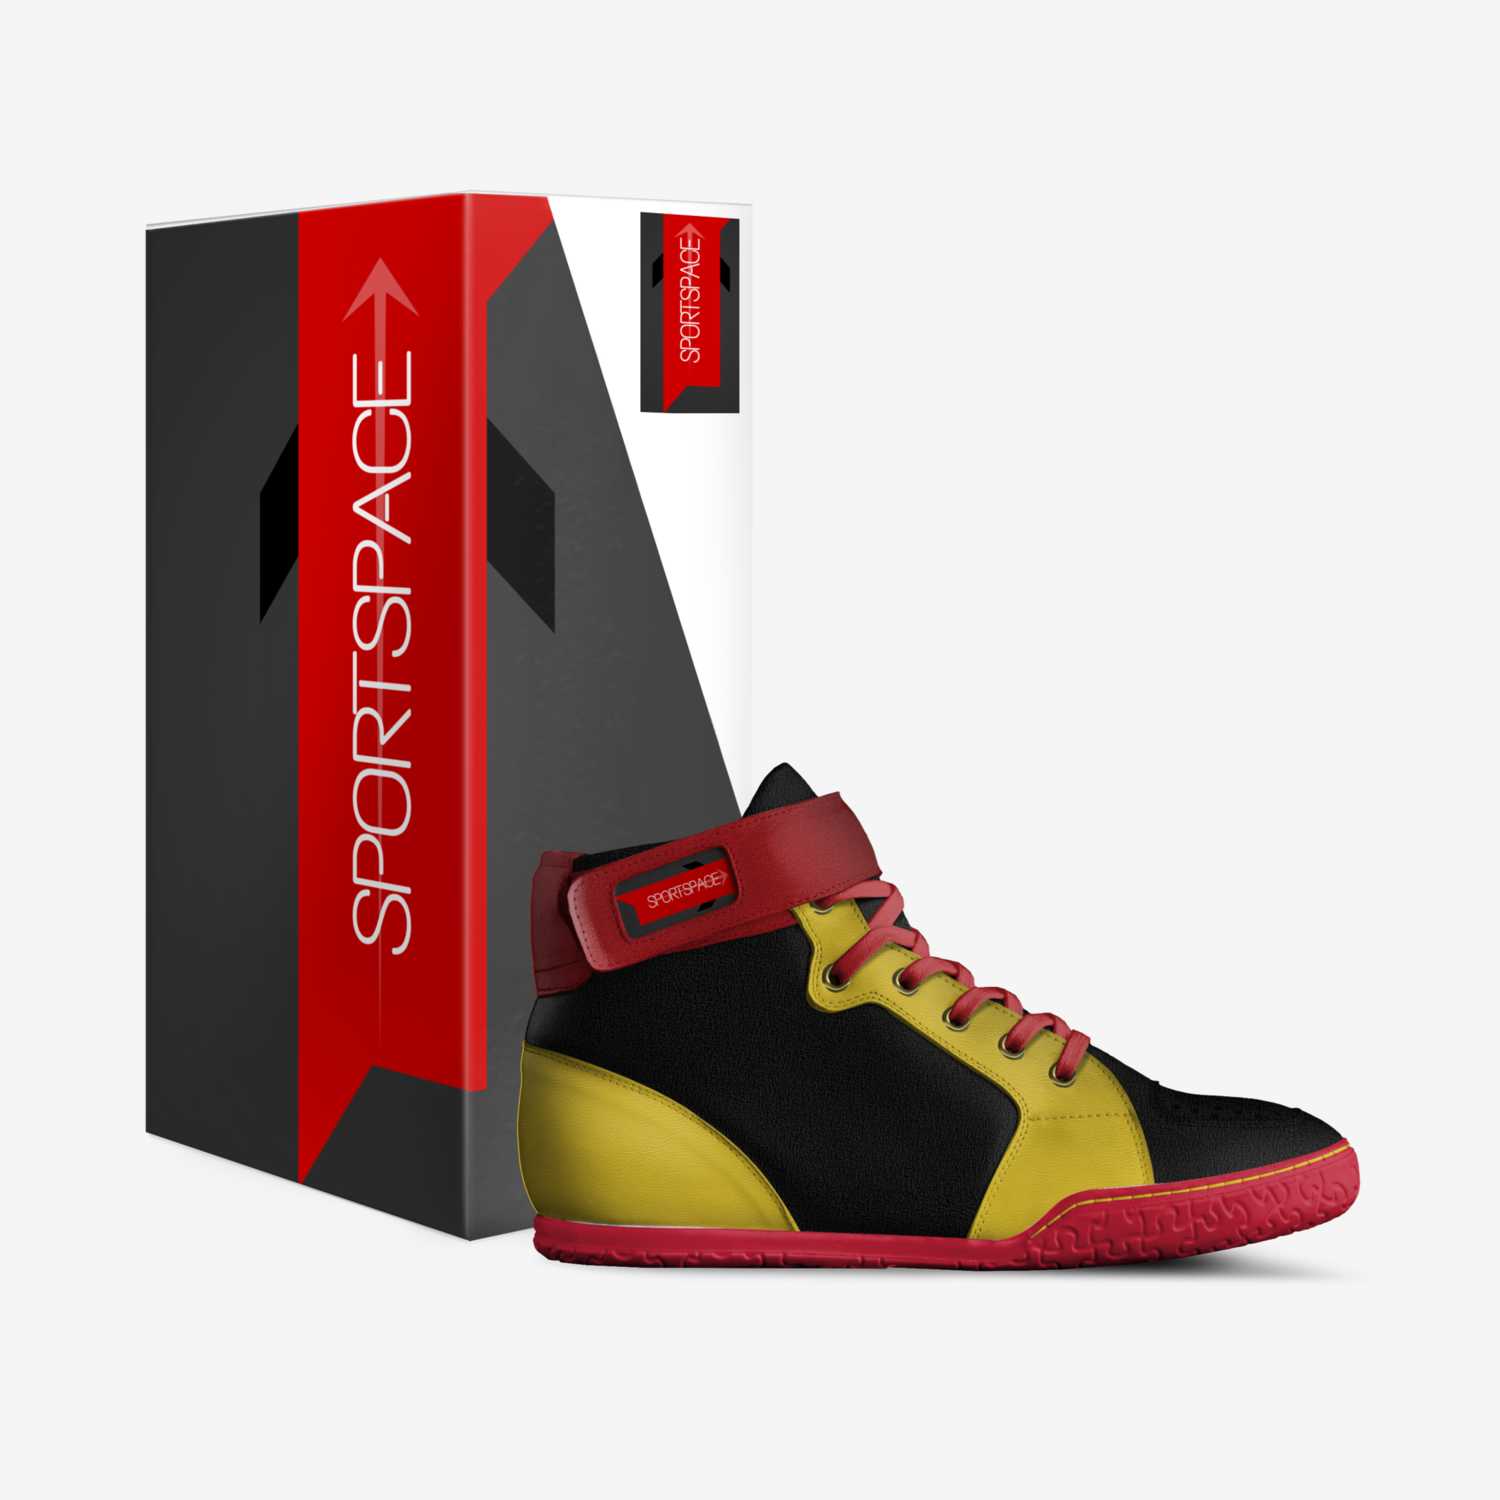 SPORTSPACE custom made in Italy shoes by Ujwal Surampalli | Box view